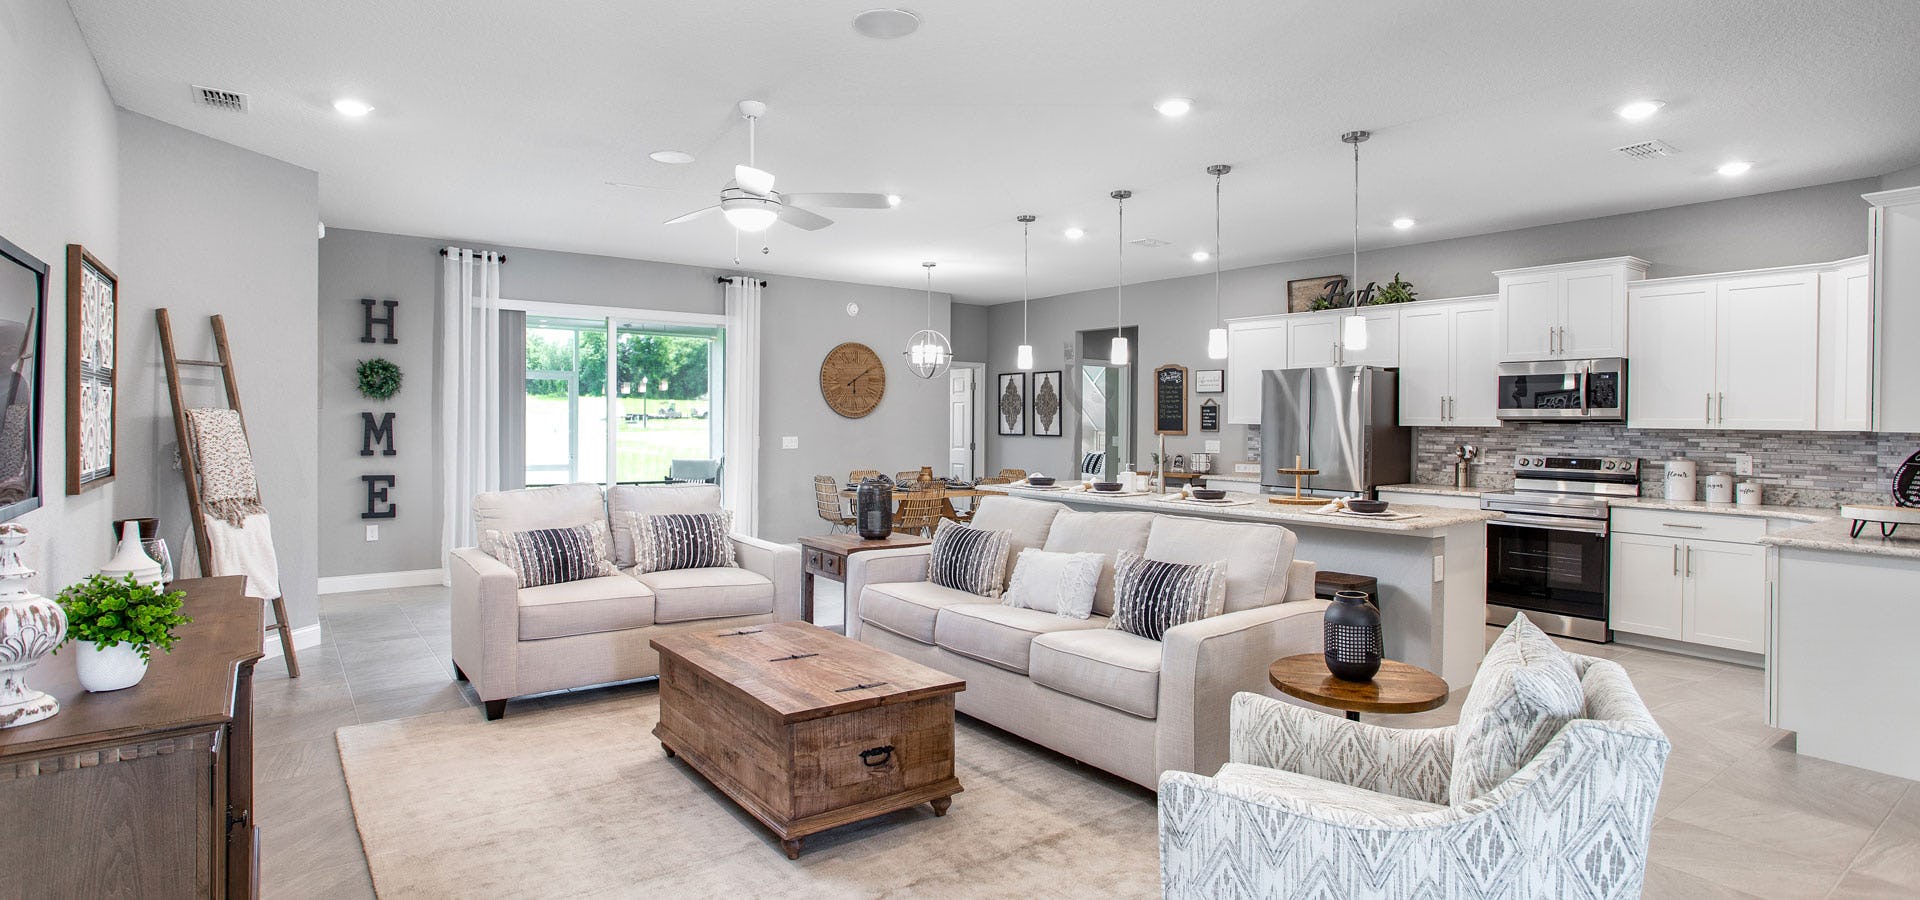 Living area of a luxurious new home in St. Cloud, FL